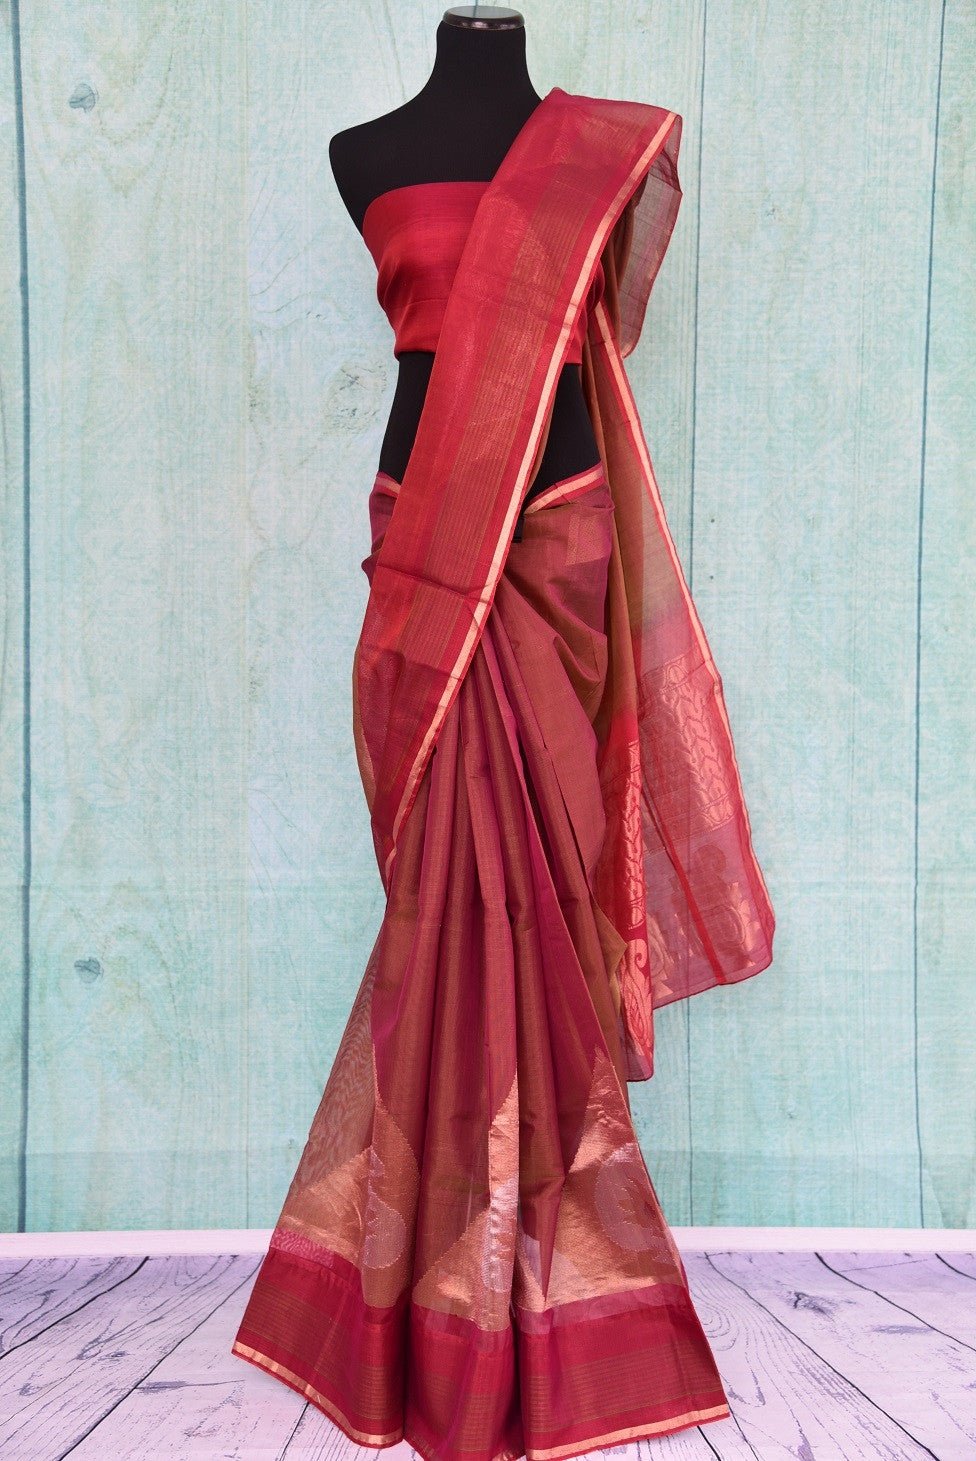 90C258 Traditional south silk saree available online in USA. The maroon and gold saree comes with paisley design and is great for festive occasions and pujas. This lovely saree is sure to be a versatile hit in your ethnic wear wardrobe.